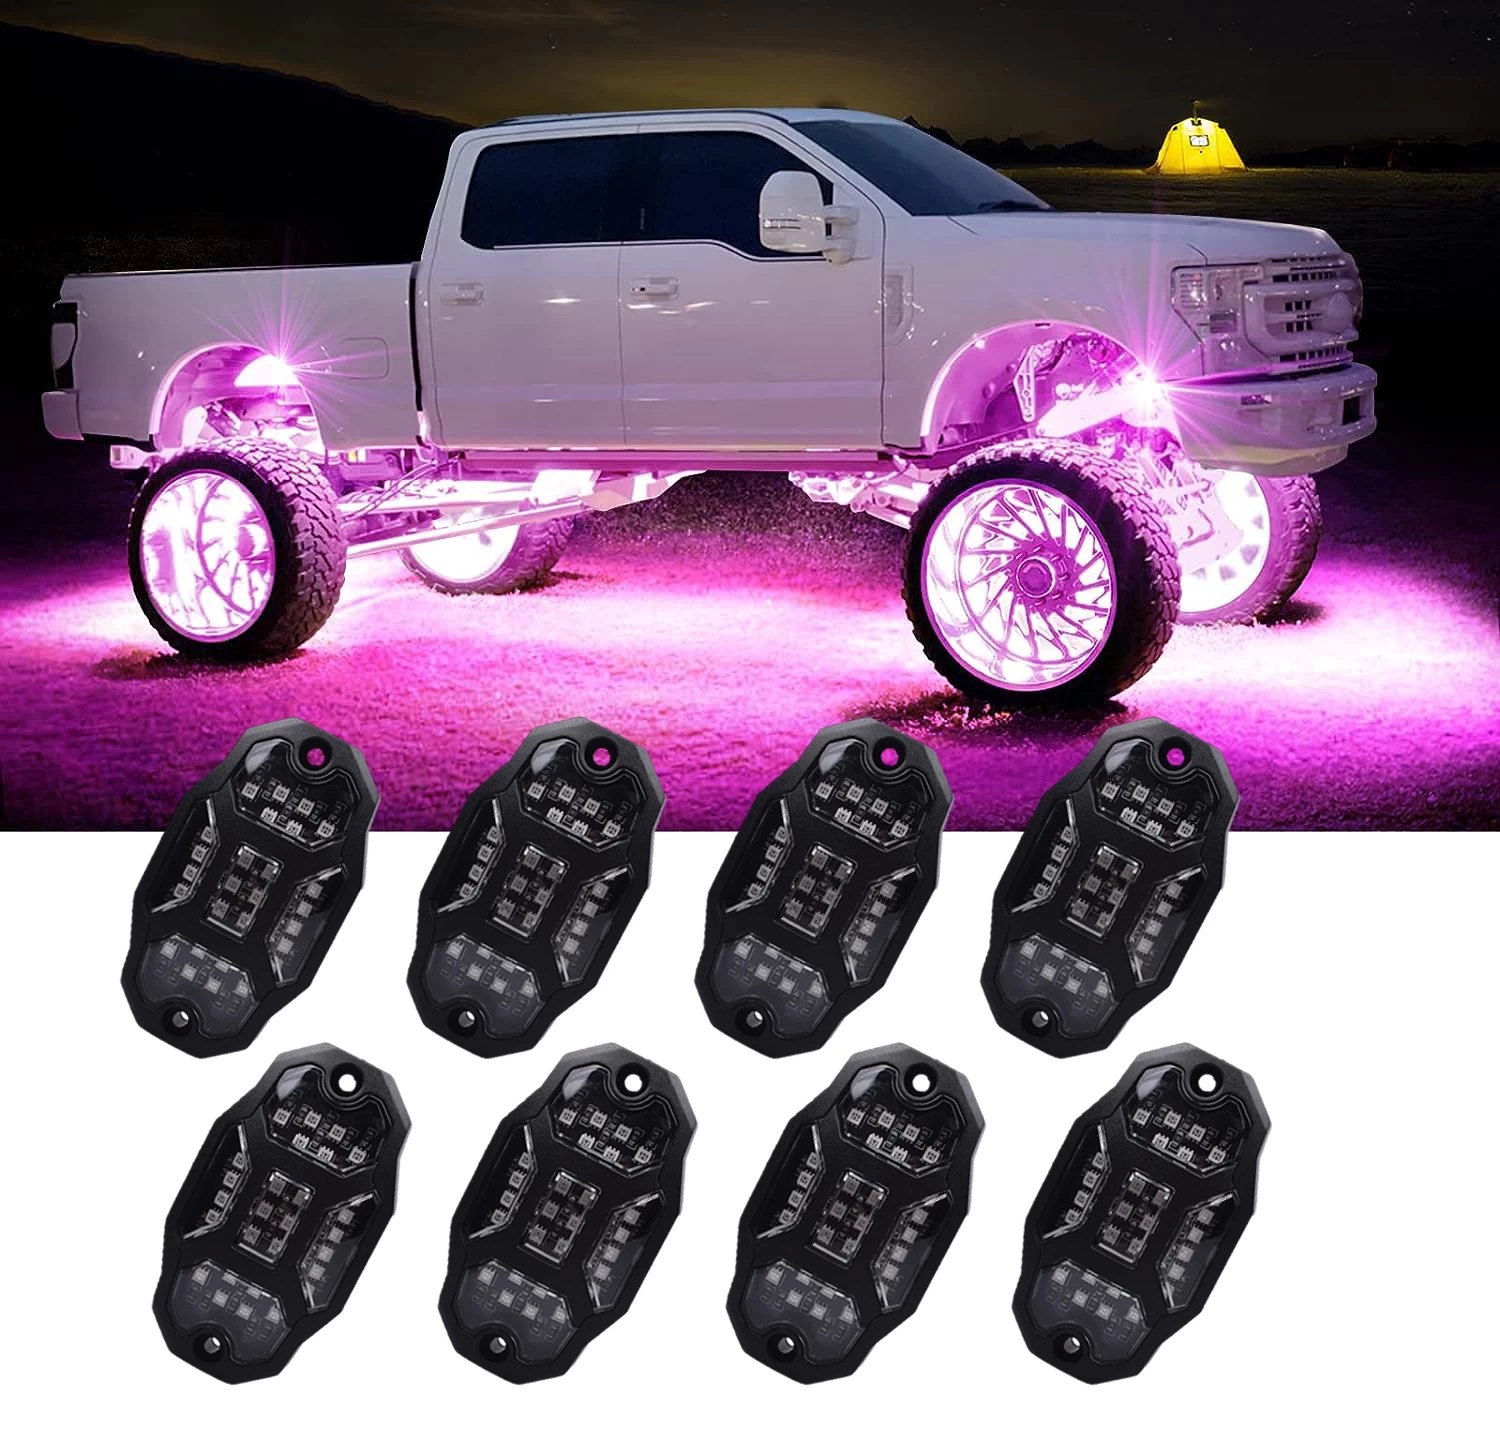 Chine Undergolw Light For Car Jeep Off-Road Truck Boat Bluetooth APP Control 4/6/8 In 1 RGB LED Rock Lights Chassis Light Music Sync - COPY - bav4w2 fabricant